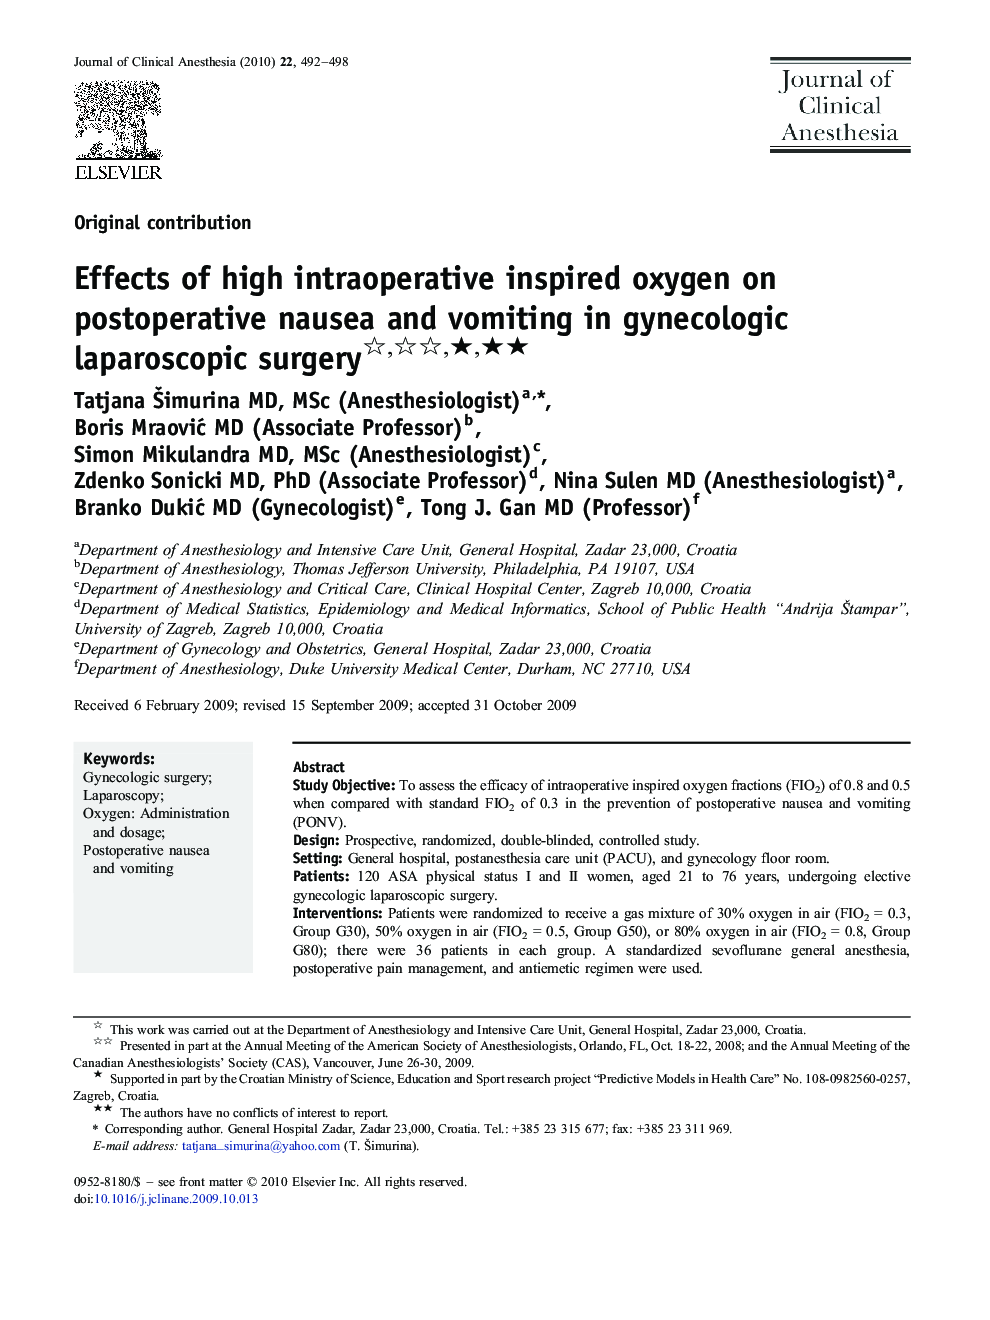 Effects of high intraoperative inspired oxygen on postoperative nausea and vomiting in gynecologic laparoscopic surgery ★★★